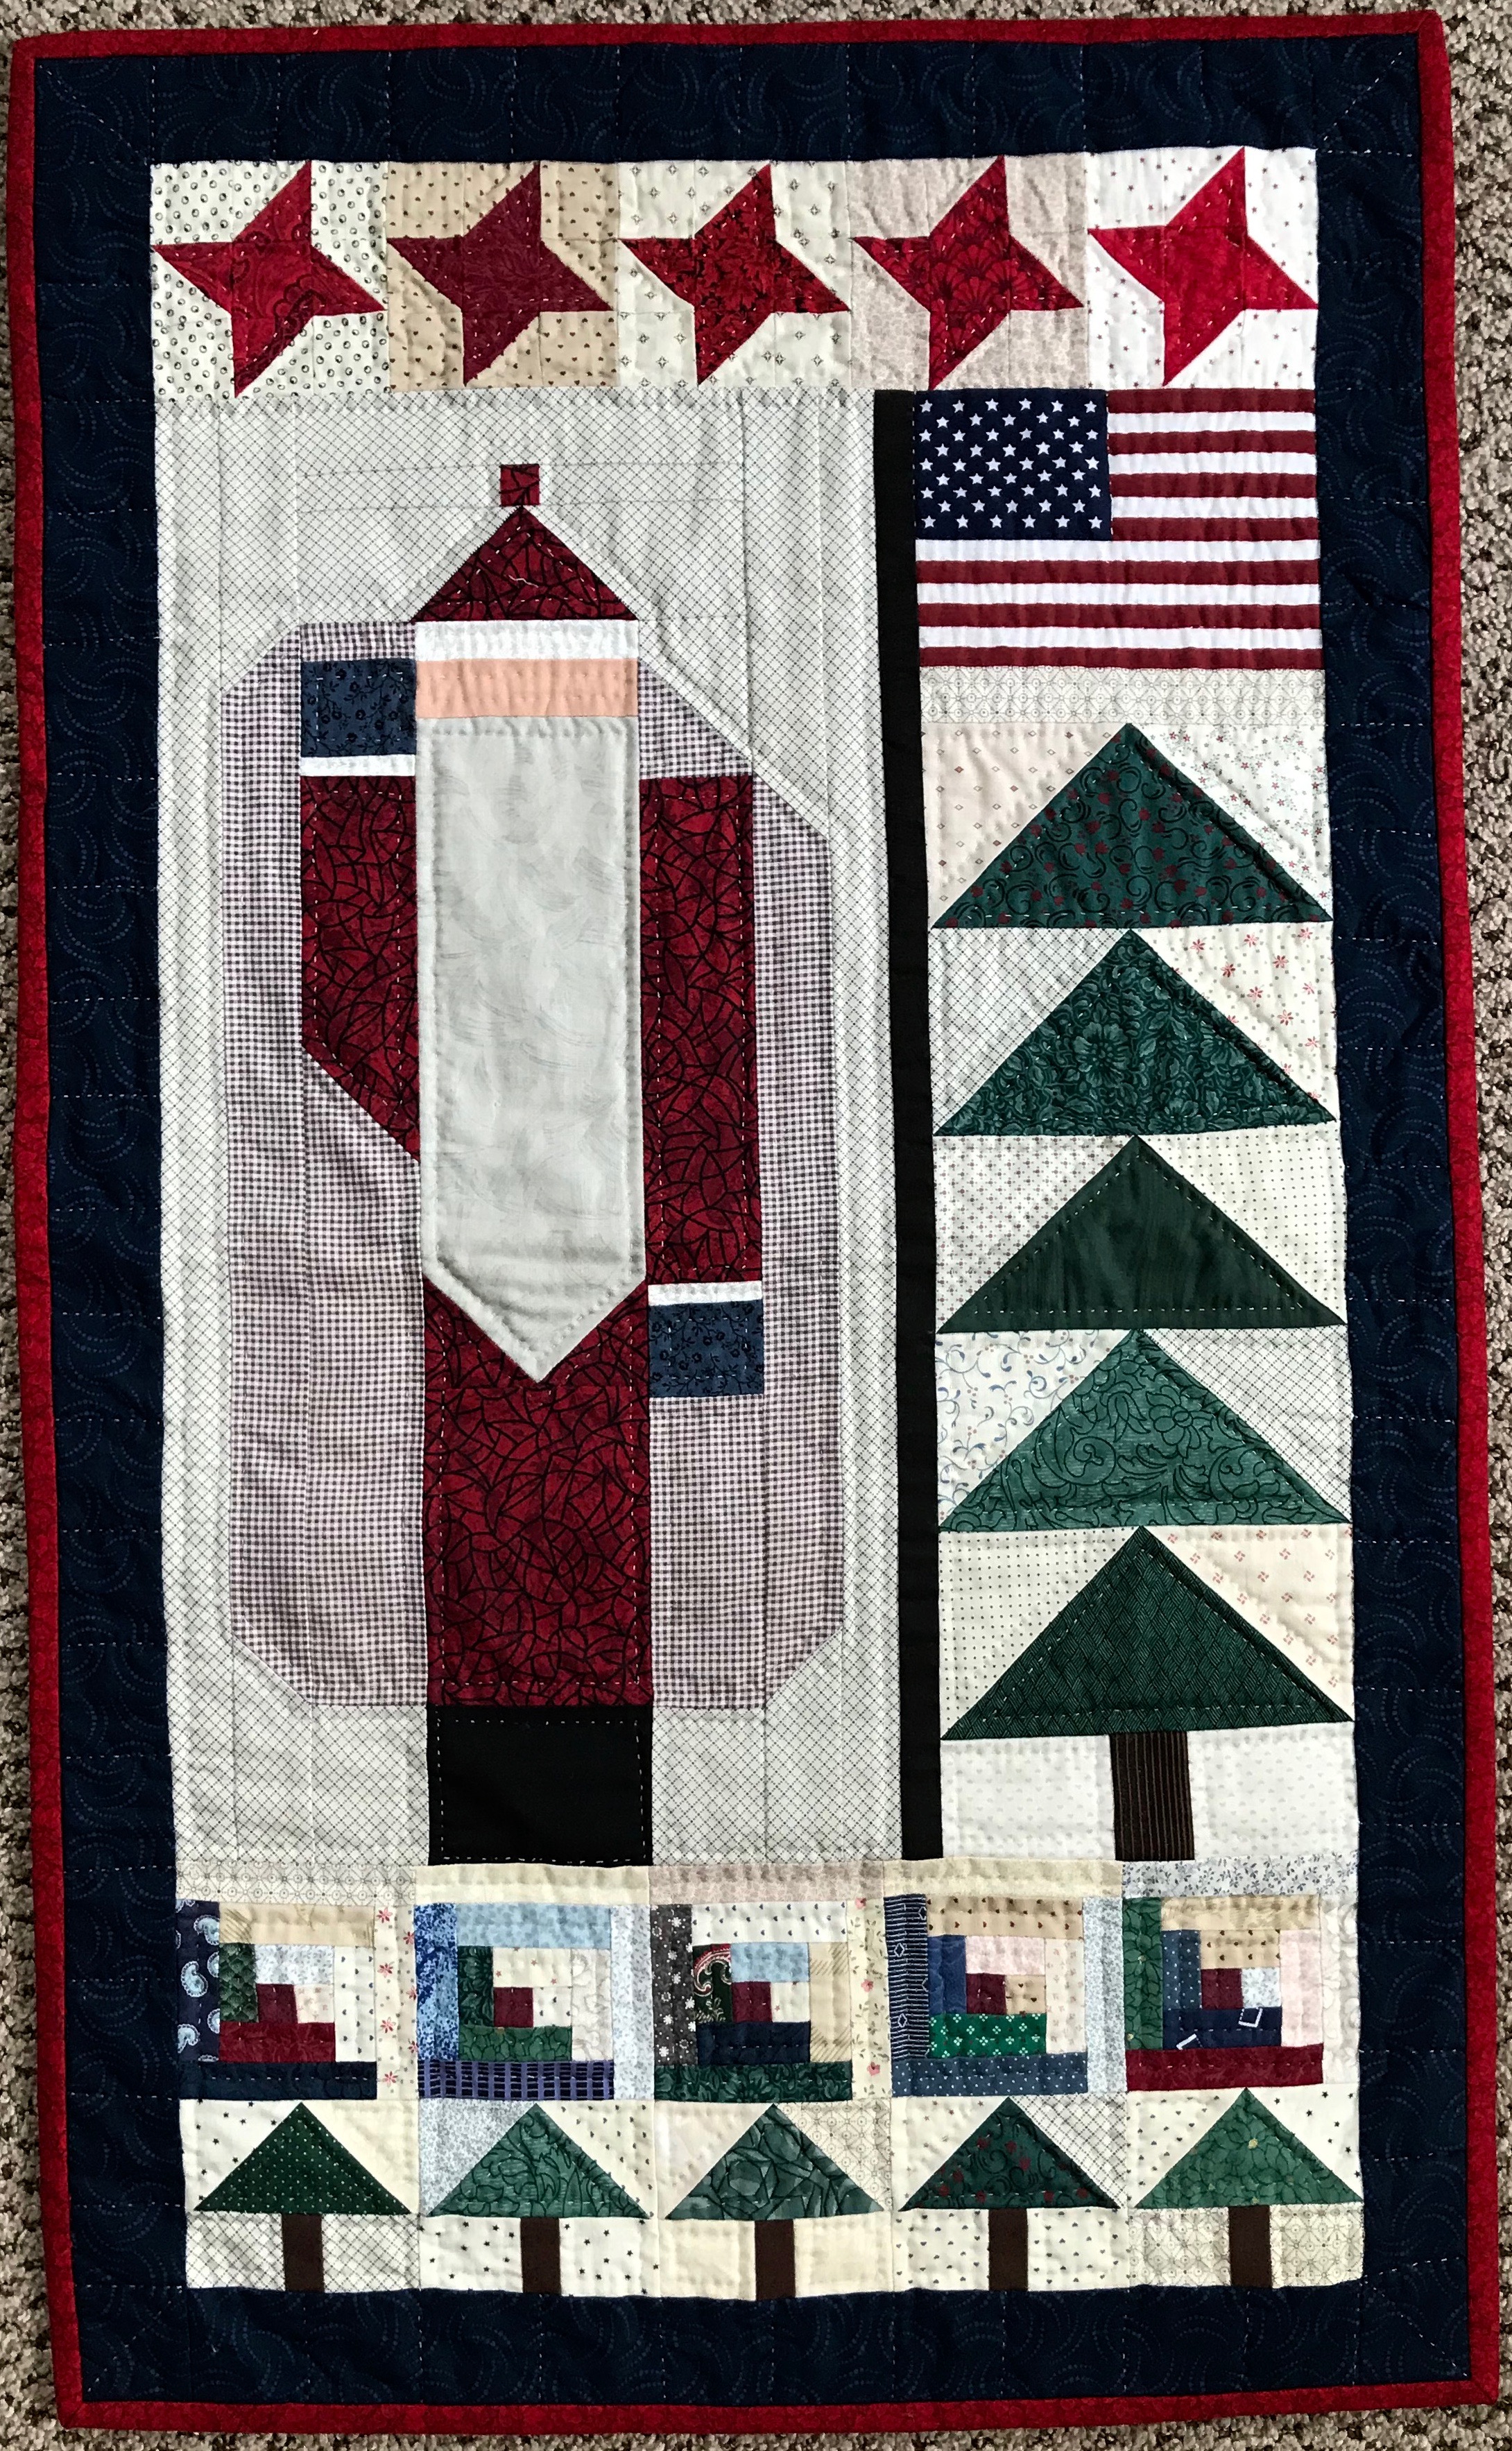 Santa in the Pines, Pieced, Hand Quilted, donated by Phyllis Schrag, 19 x 32”